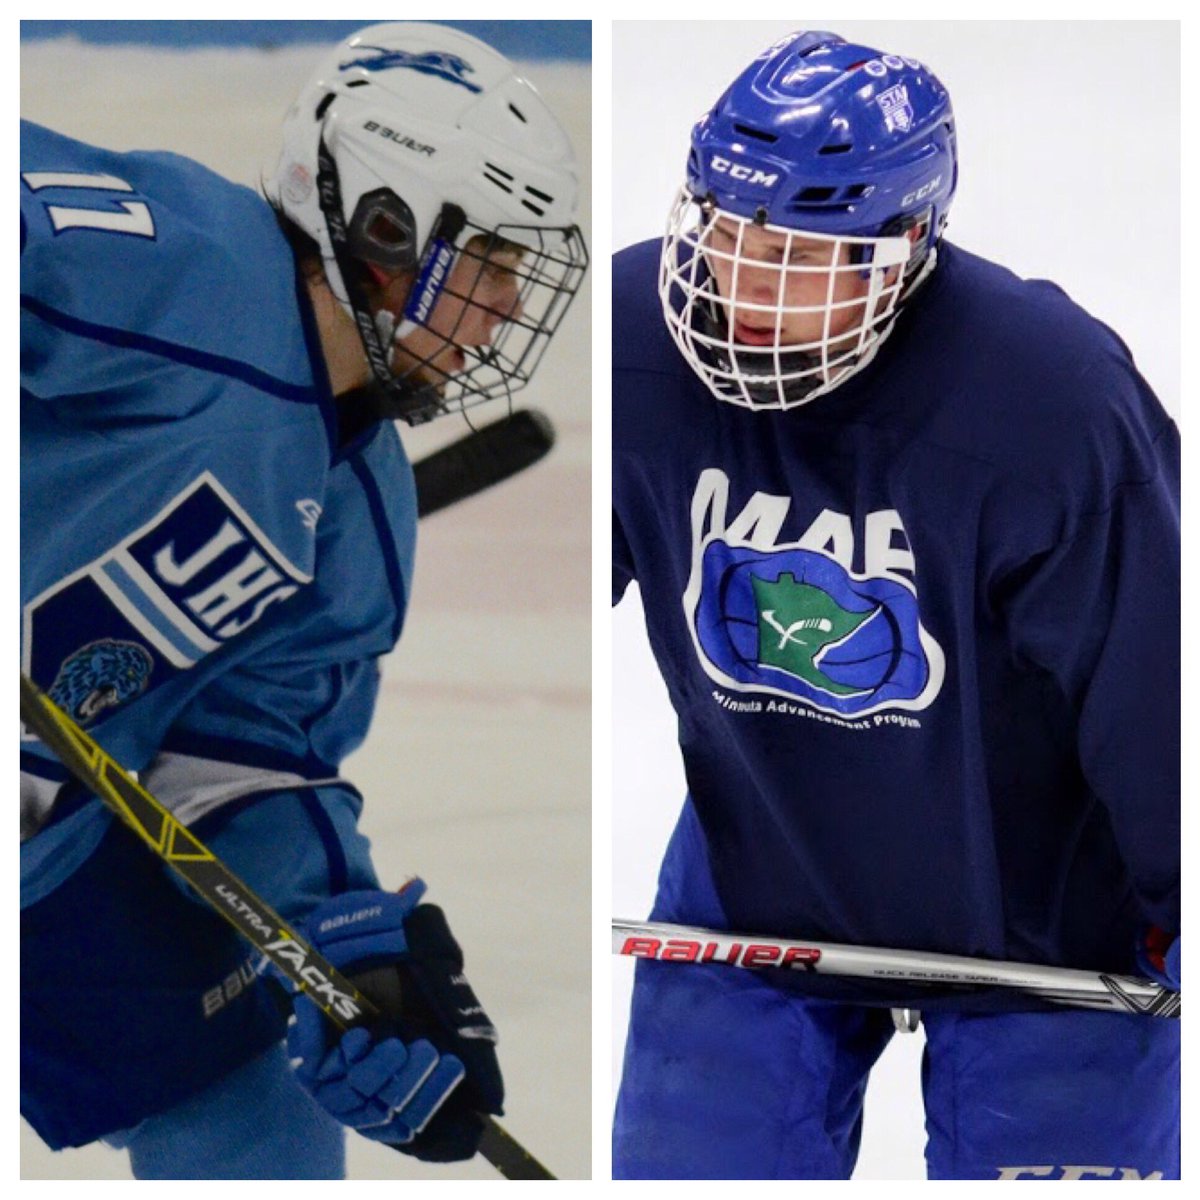 Finals Faceoff: Jr. d-men @millaman8 & @Chase_Foley17 go to battle in tonight's 3AA championship 7pm at Ridder #SS4L